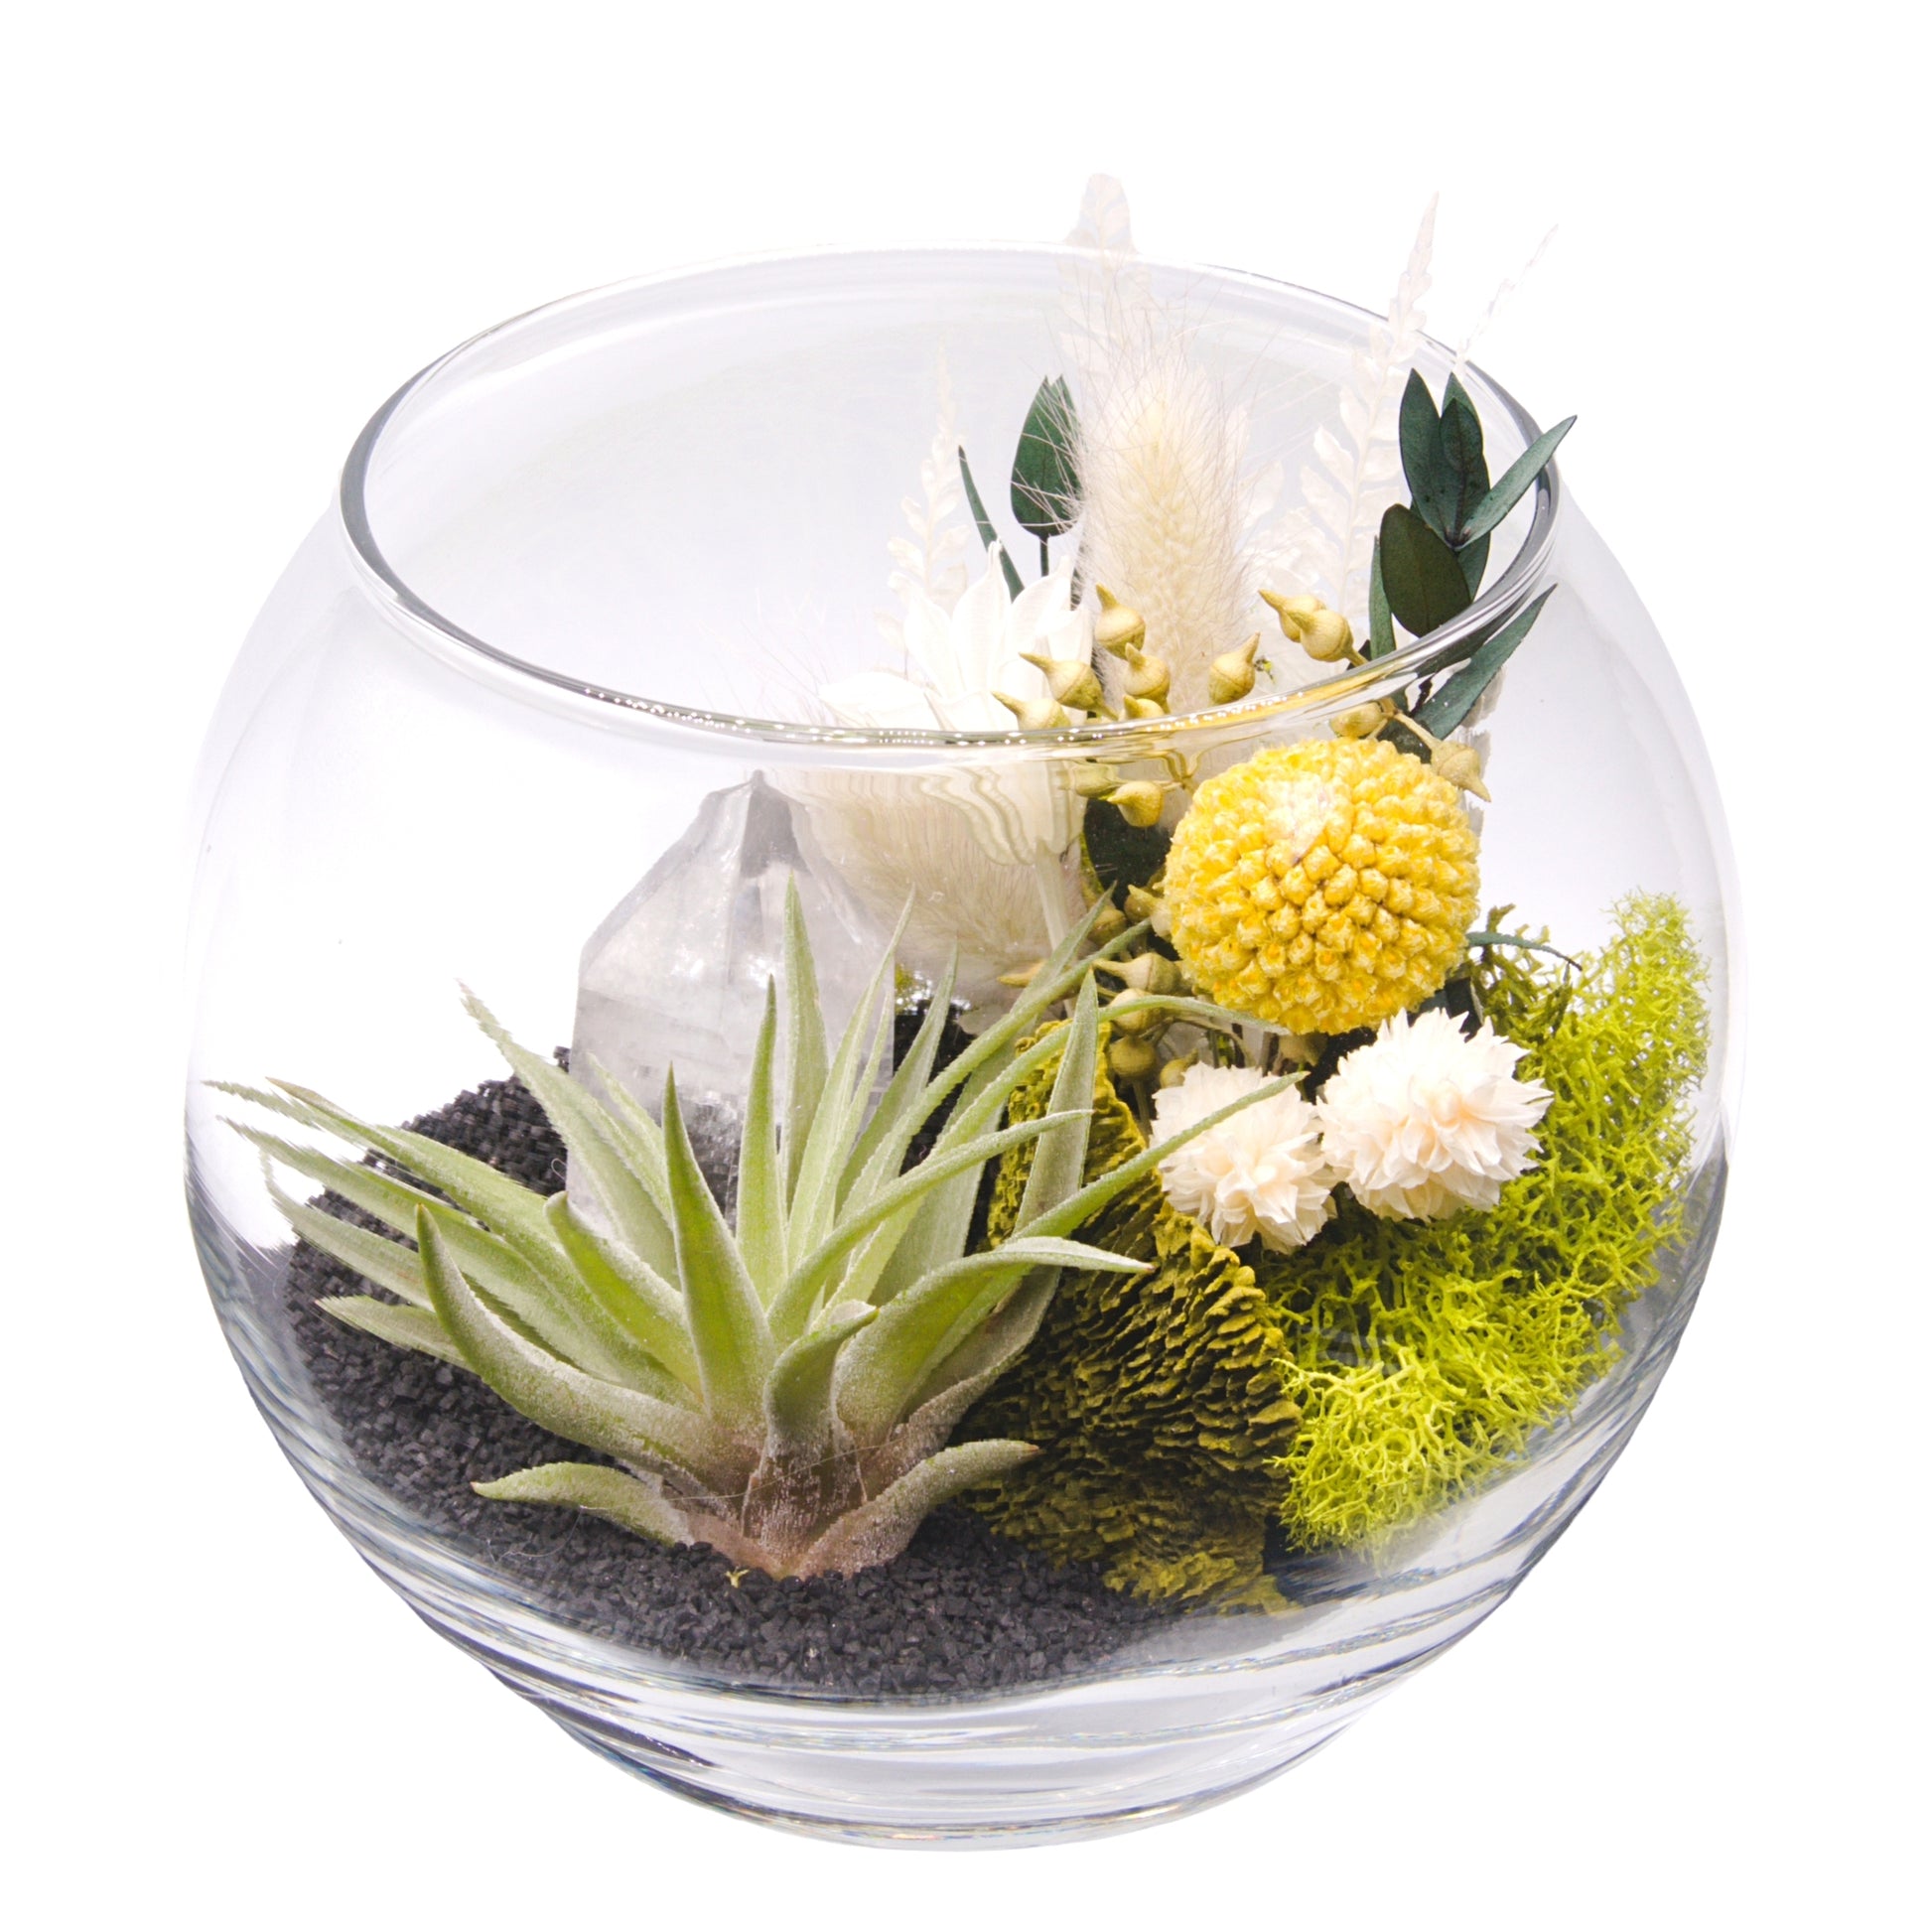 A glass bowl airplant terrarium with black sand, a bouquet of dried flowers, green moss, a dried mushroom and a crystal quartz tower.